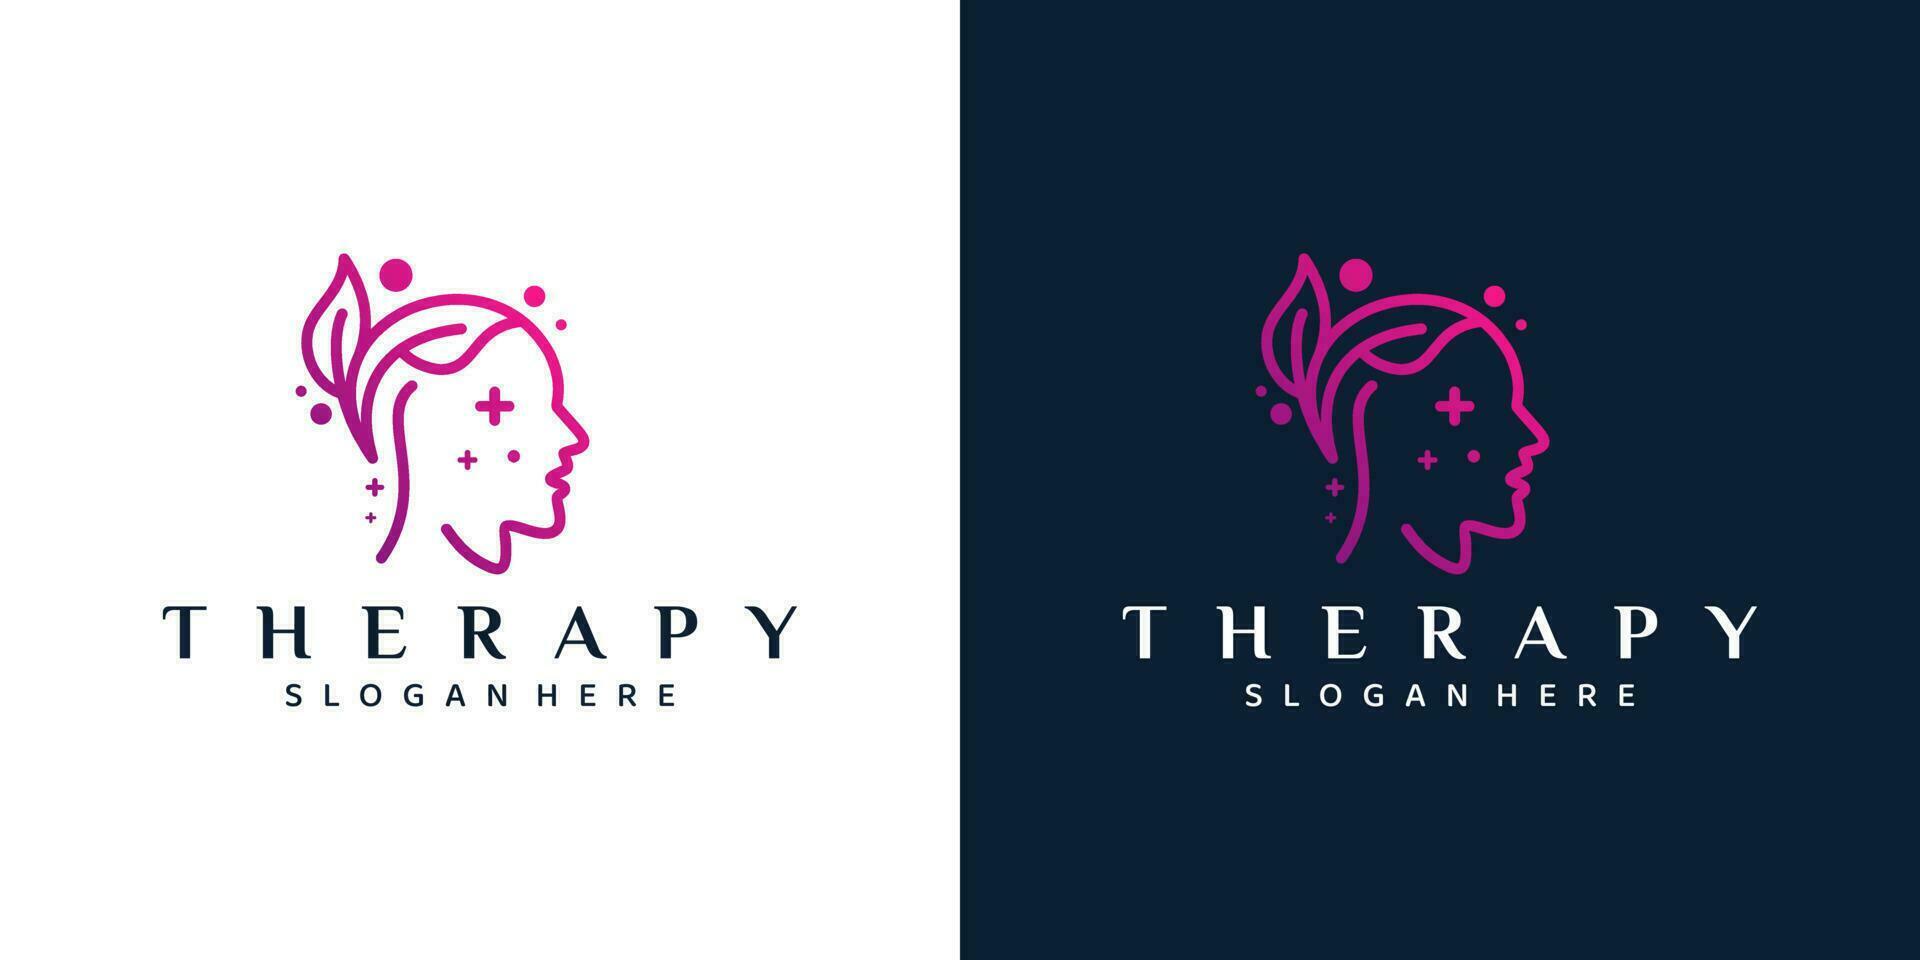 Mental health logo design. Psychotherapy symbol concept. Human head with natural therapy mind graphic design vector illustration.